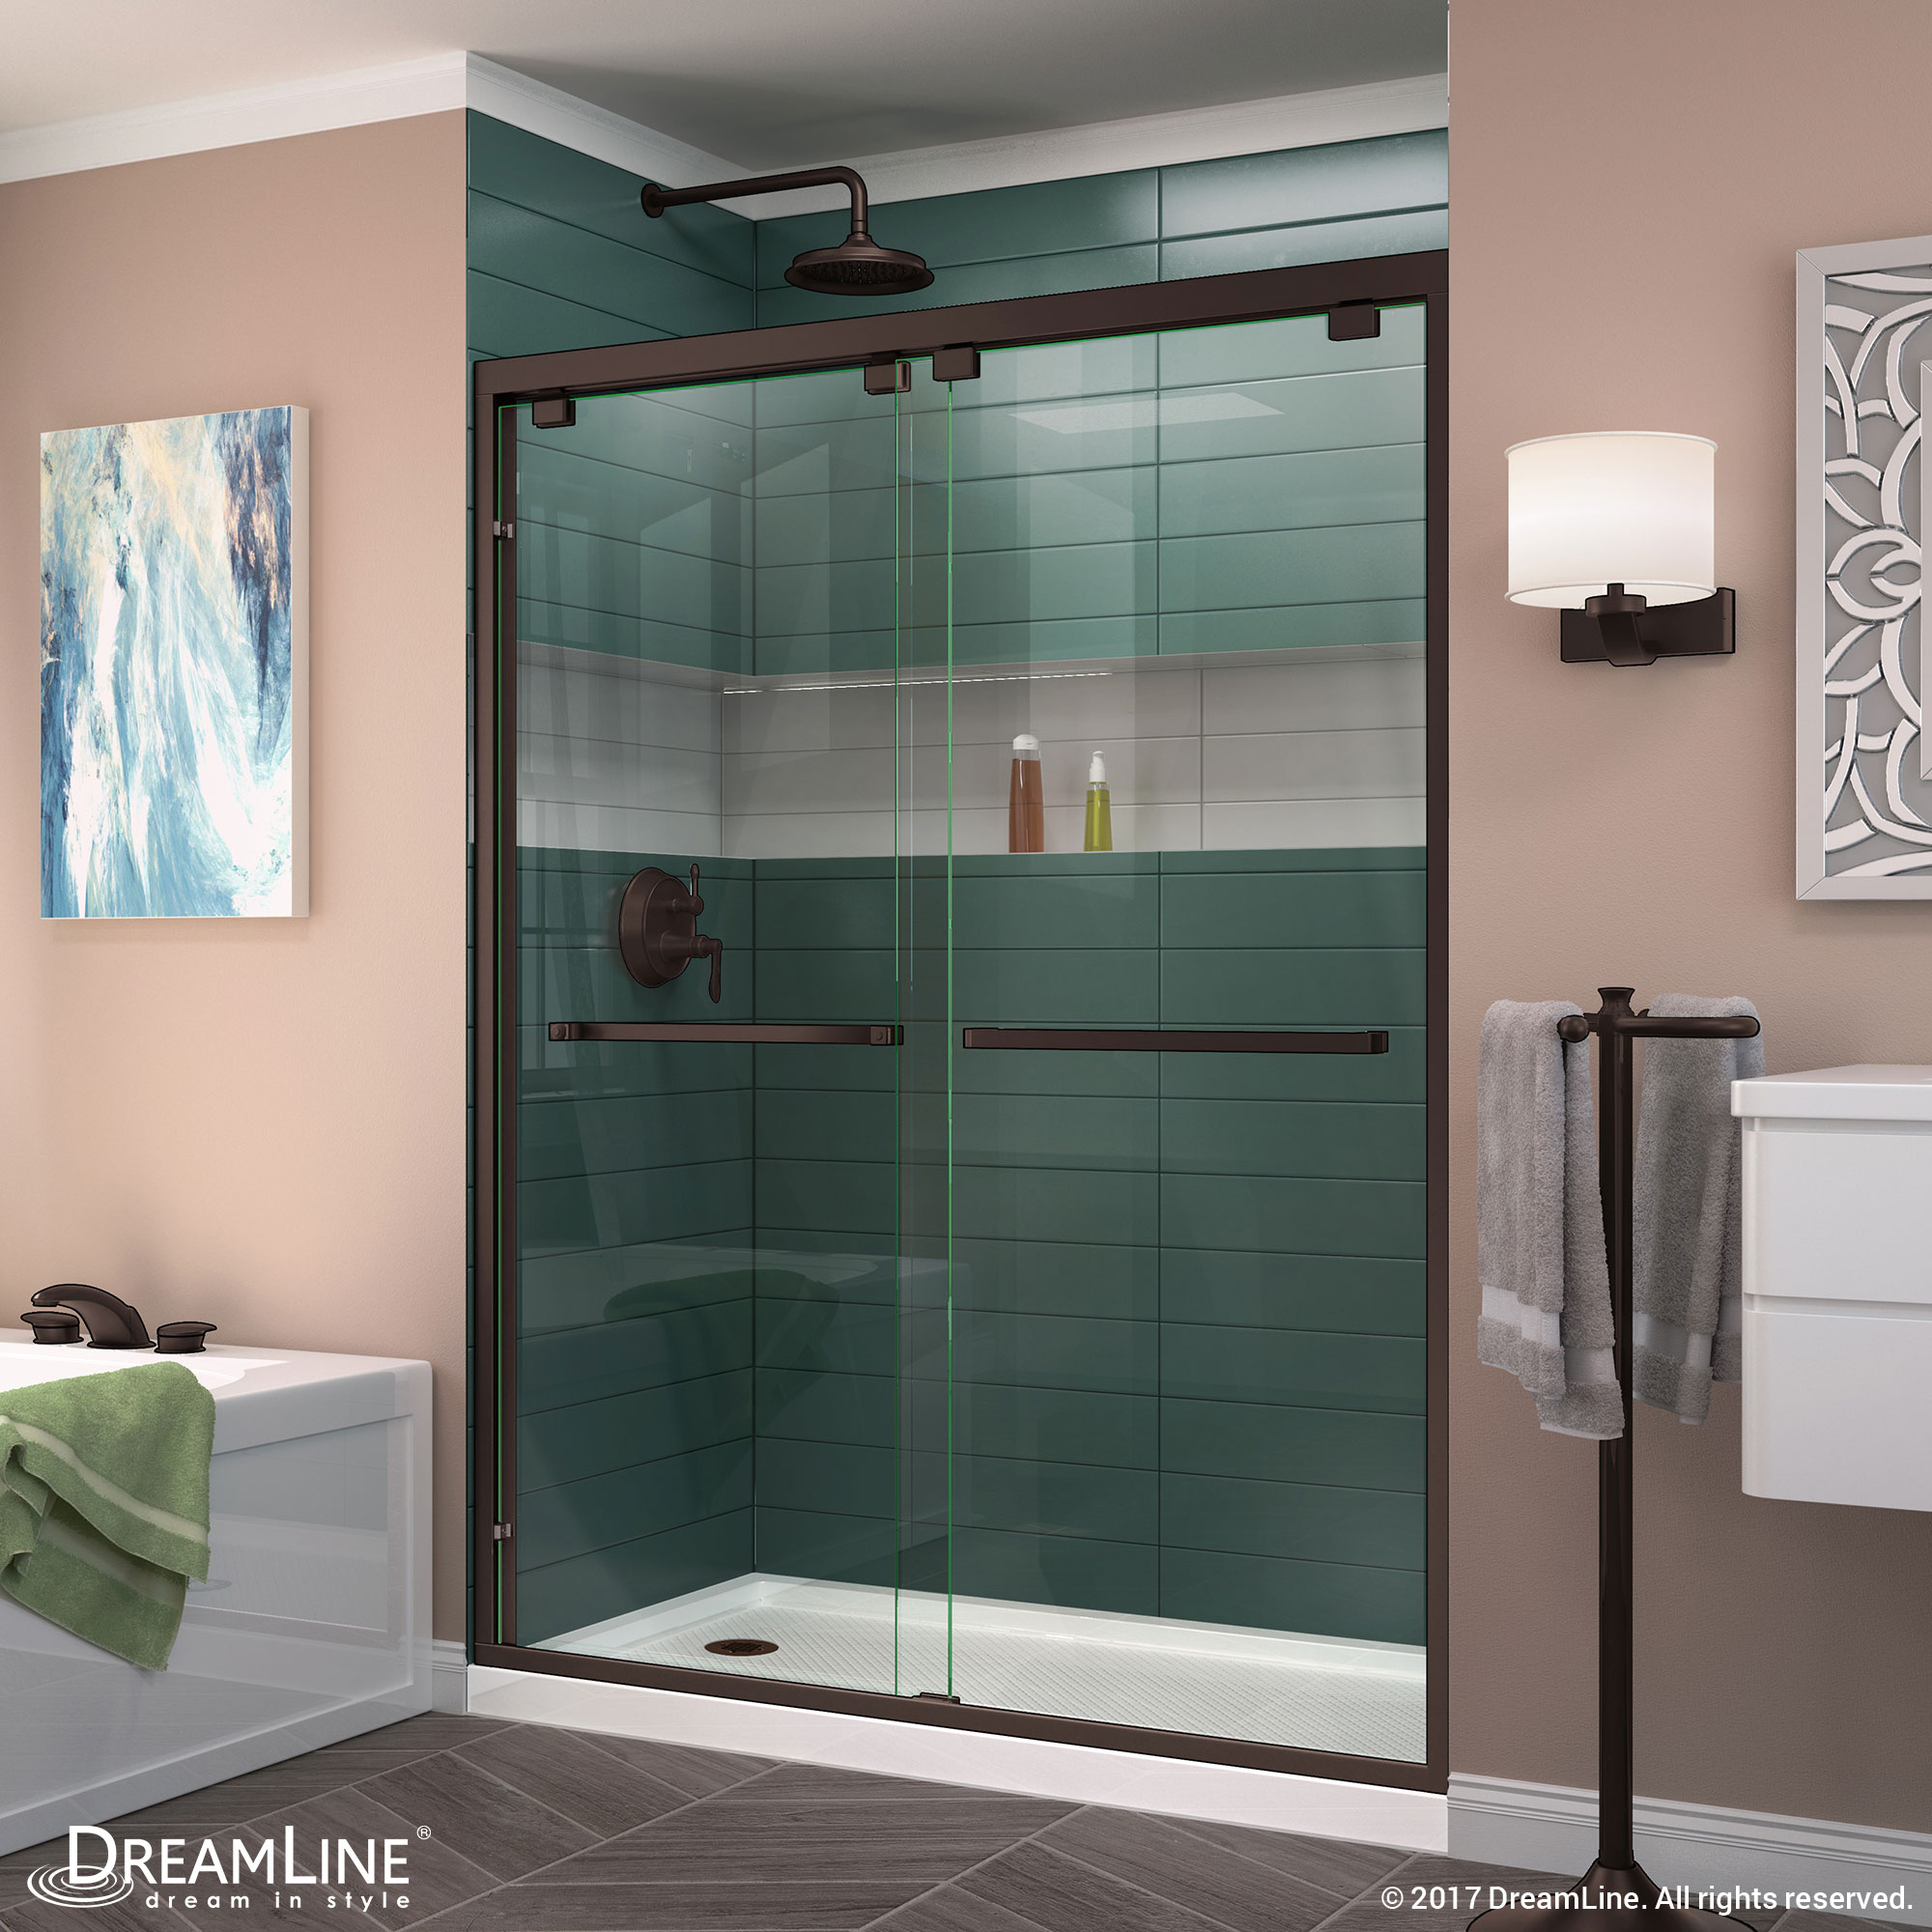 DreamLine Encore 30 in. D x 60 in. W x 78 3/4 in. H Bypass Shower Door in Brushed Nickel and Left Drain White Base Kit